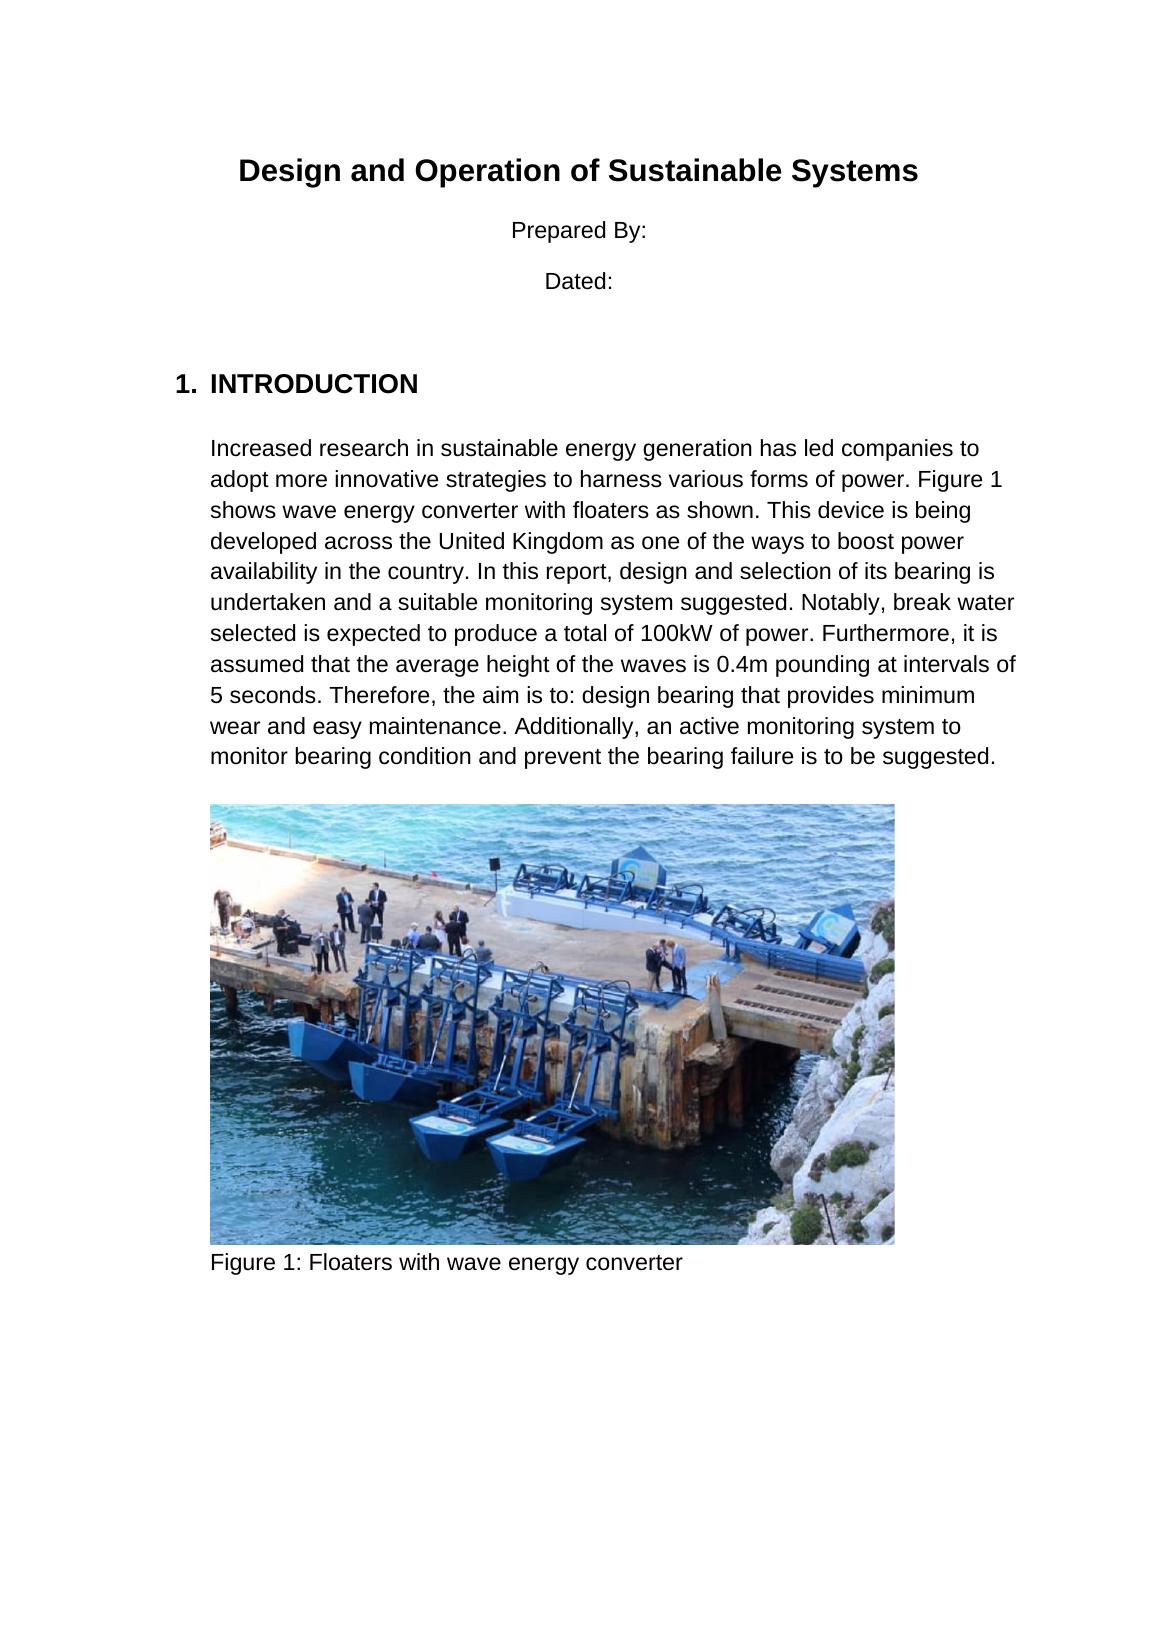 Design and Operation of Sustainable Systems_1